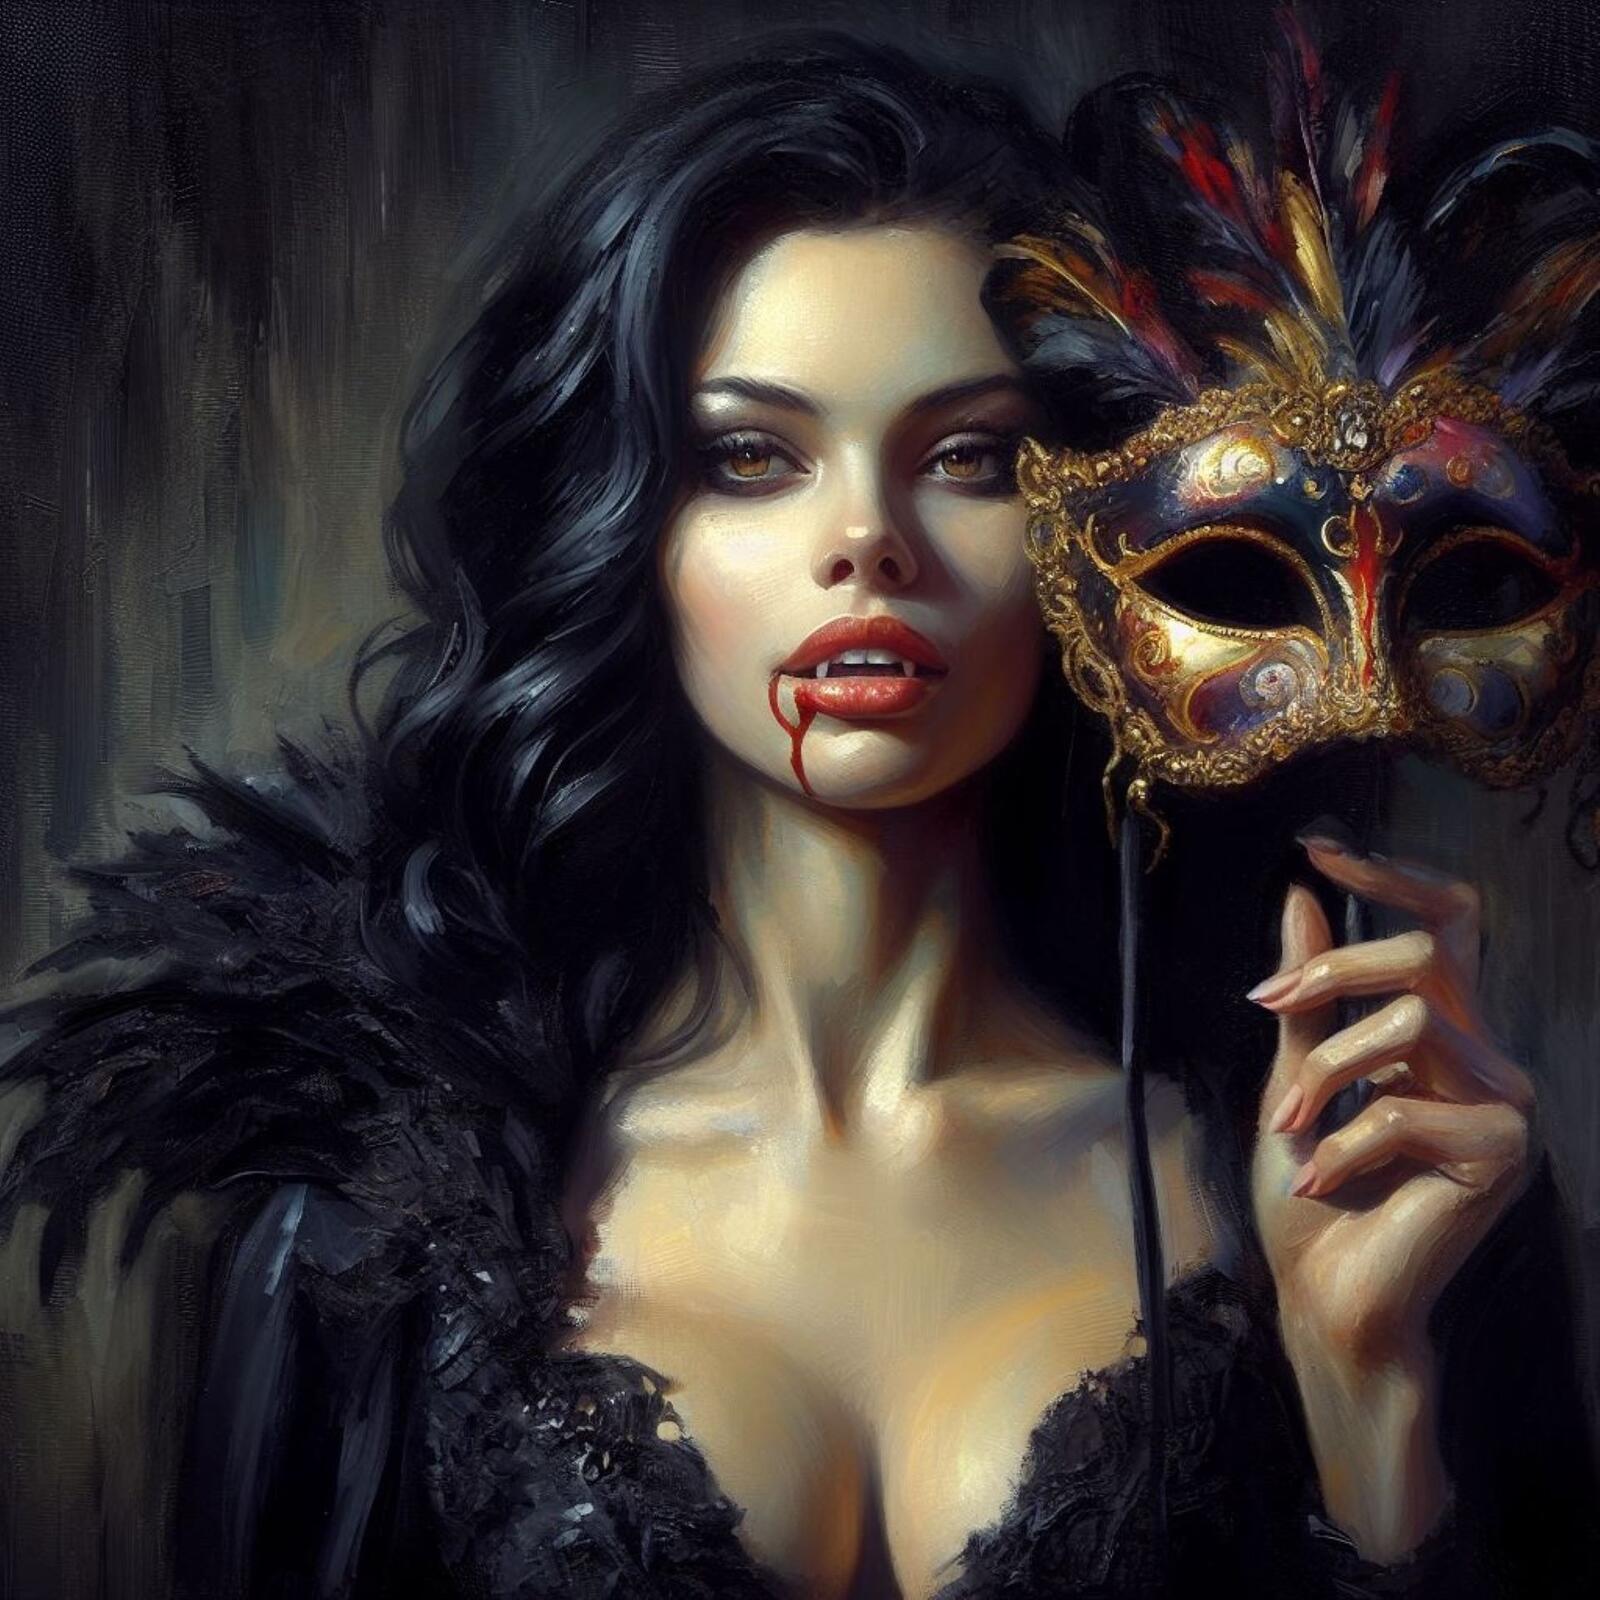 The vampire girl with the mask